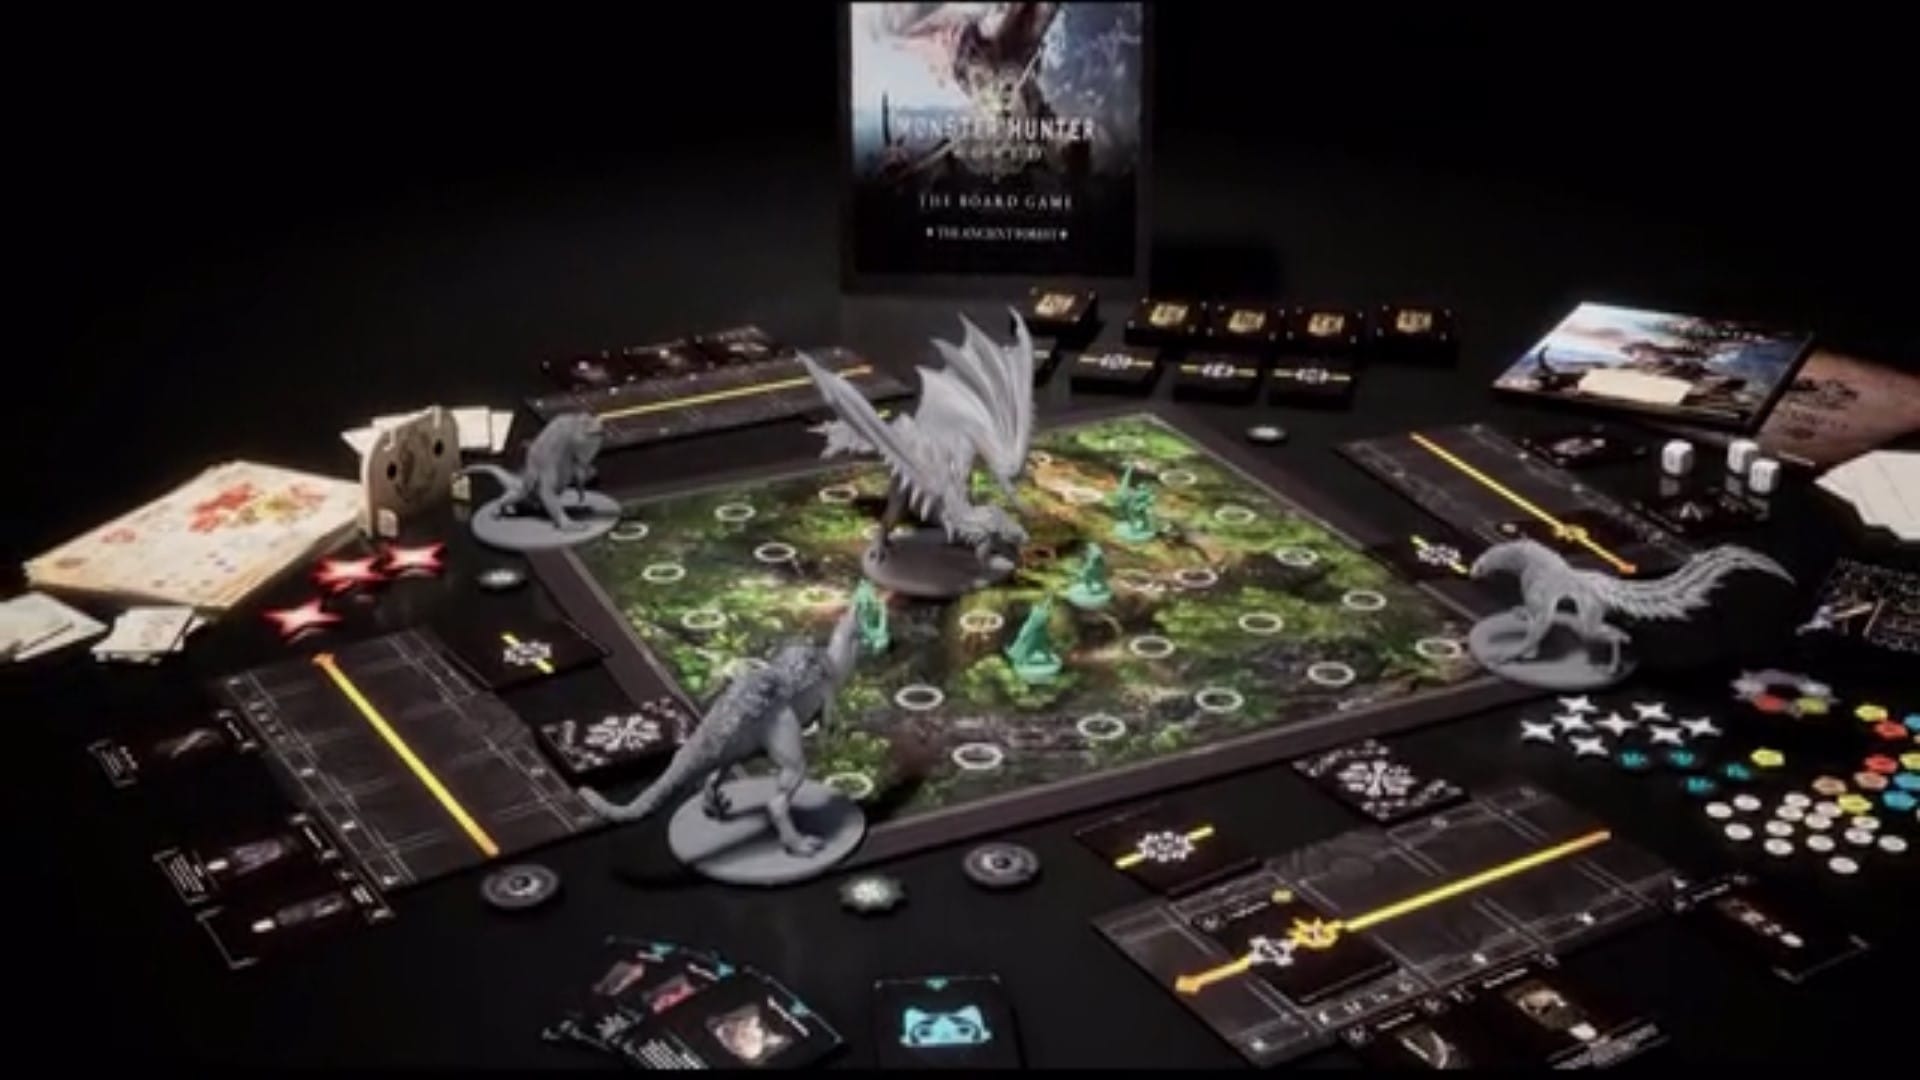 Card Hunter' is the next great board game, and it's all in your browser